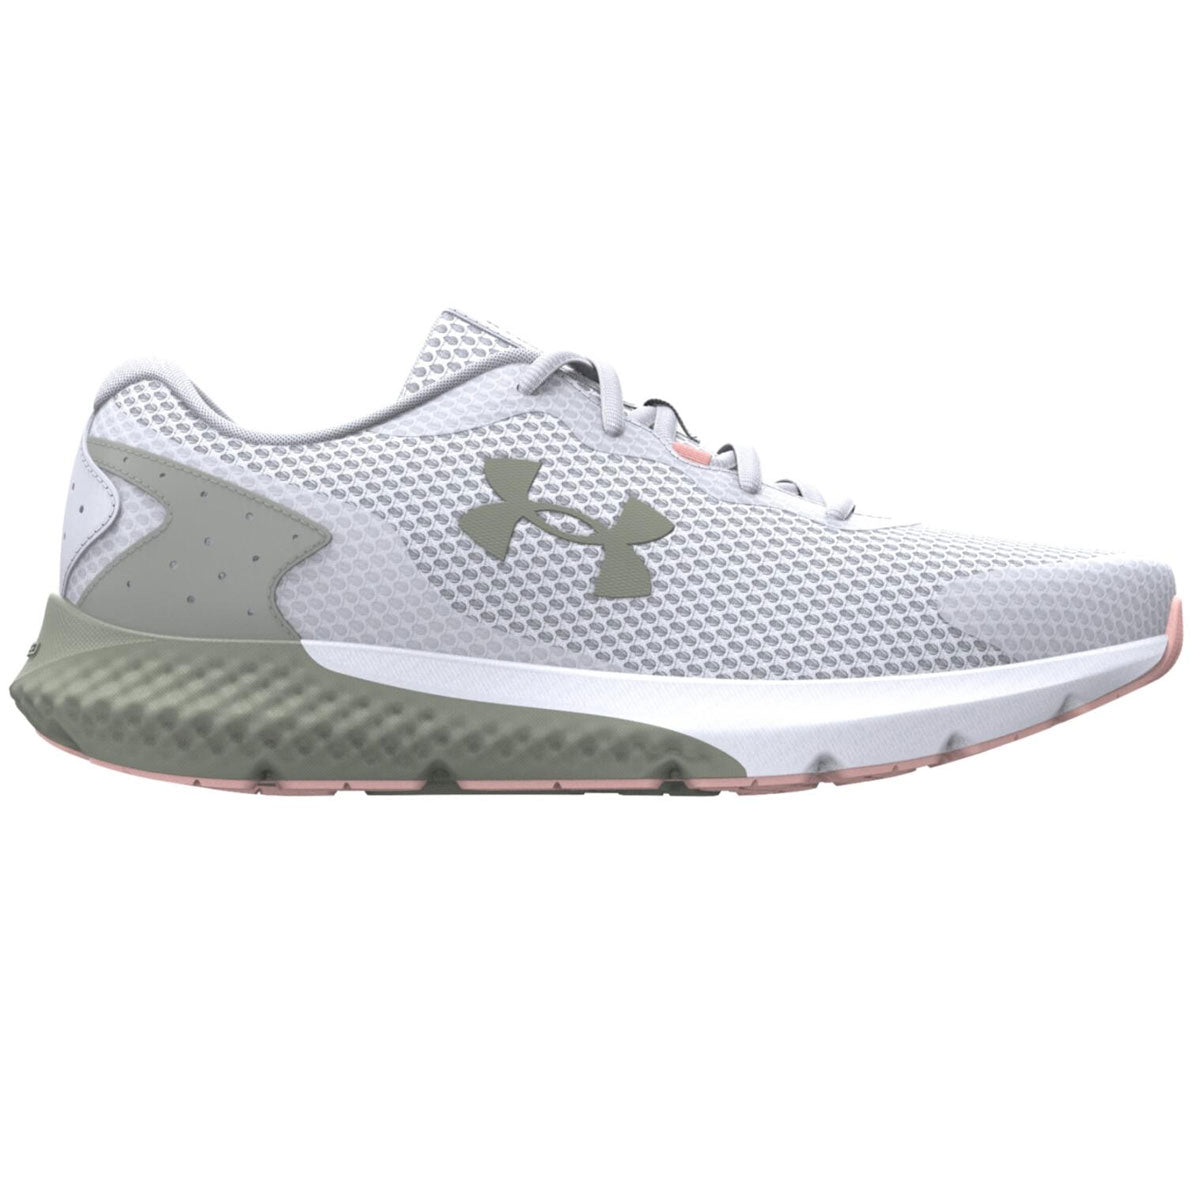 Under Armour Charged Rogue 3 SKU: 9598923 